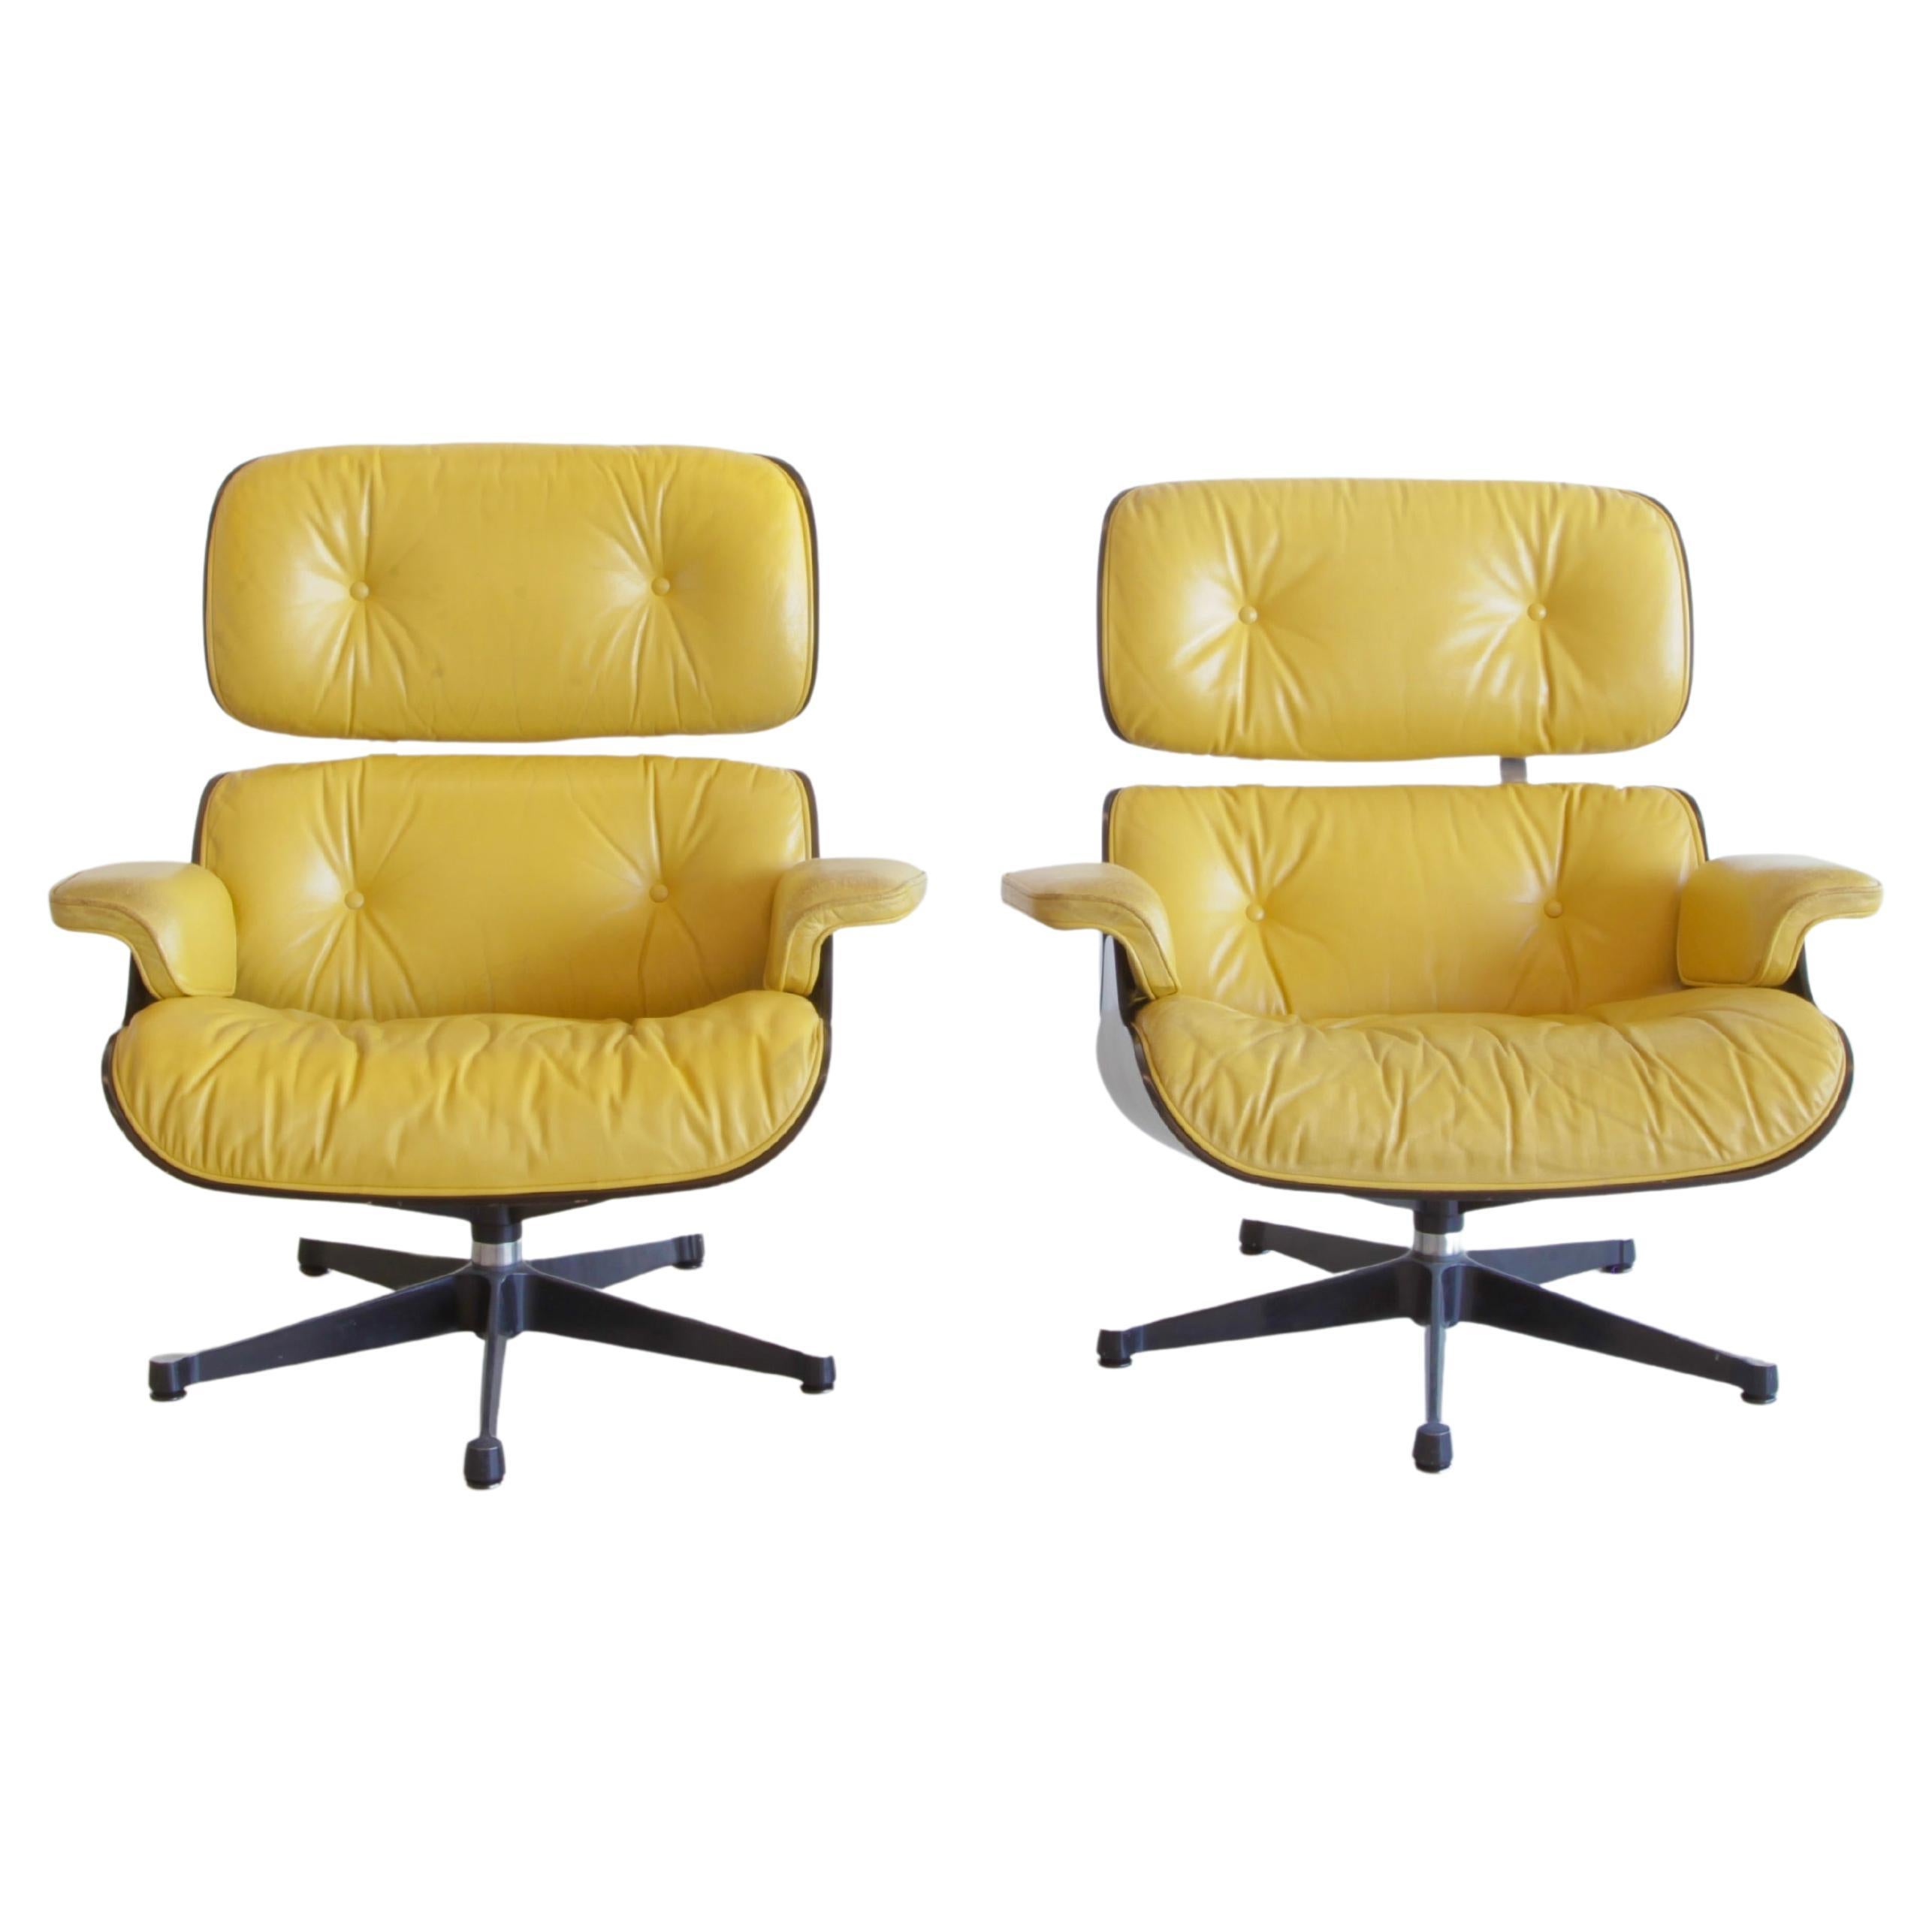 Pair of Lounge Chairs by Charles & Ray Eames, Vitra, 1980s